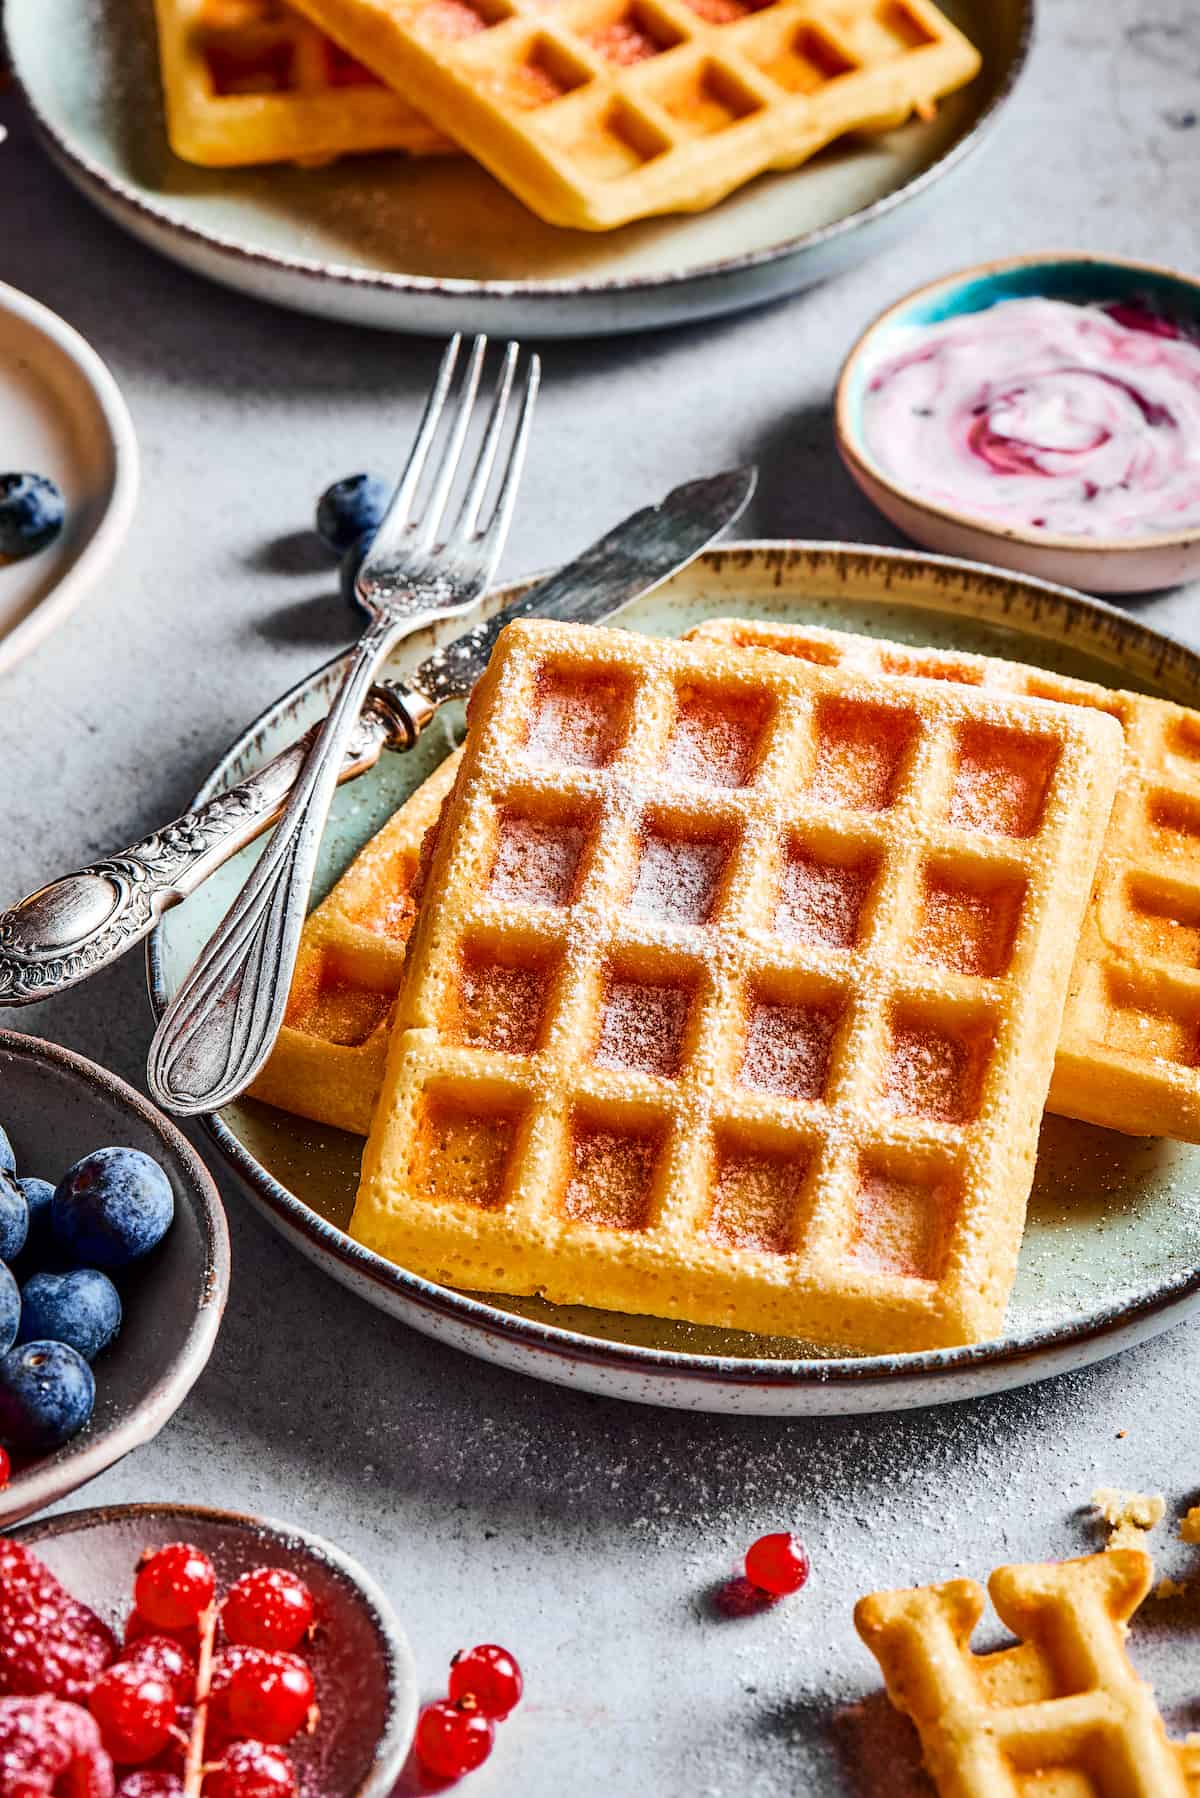 Homemade waffles on a table.